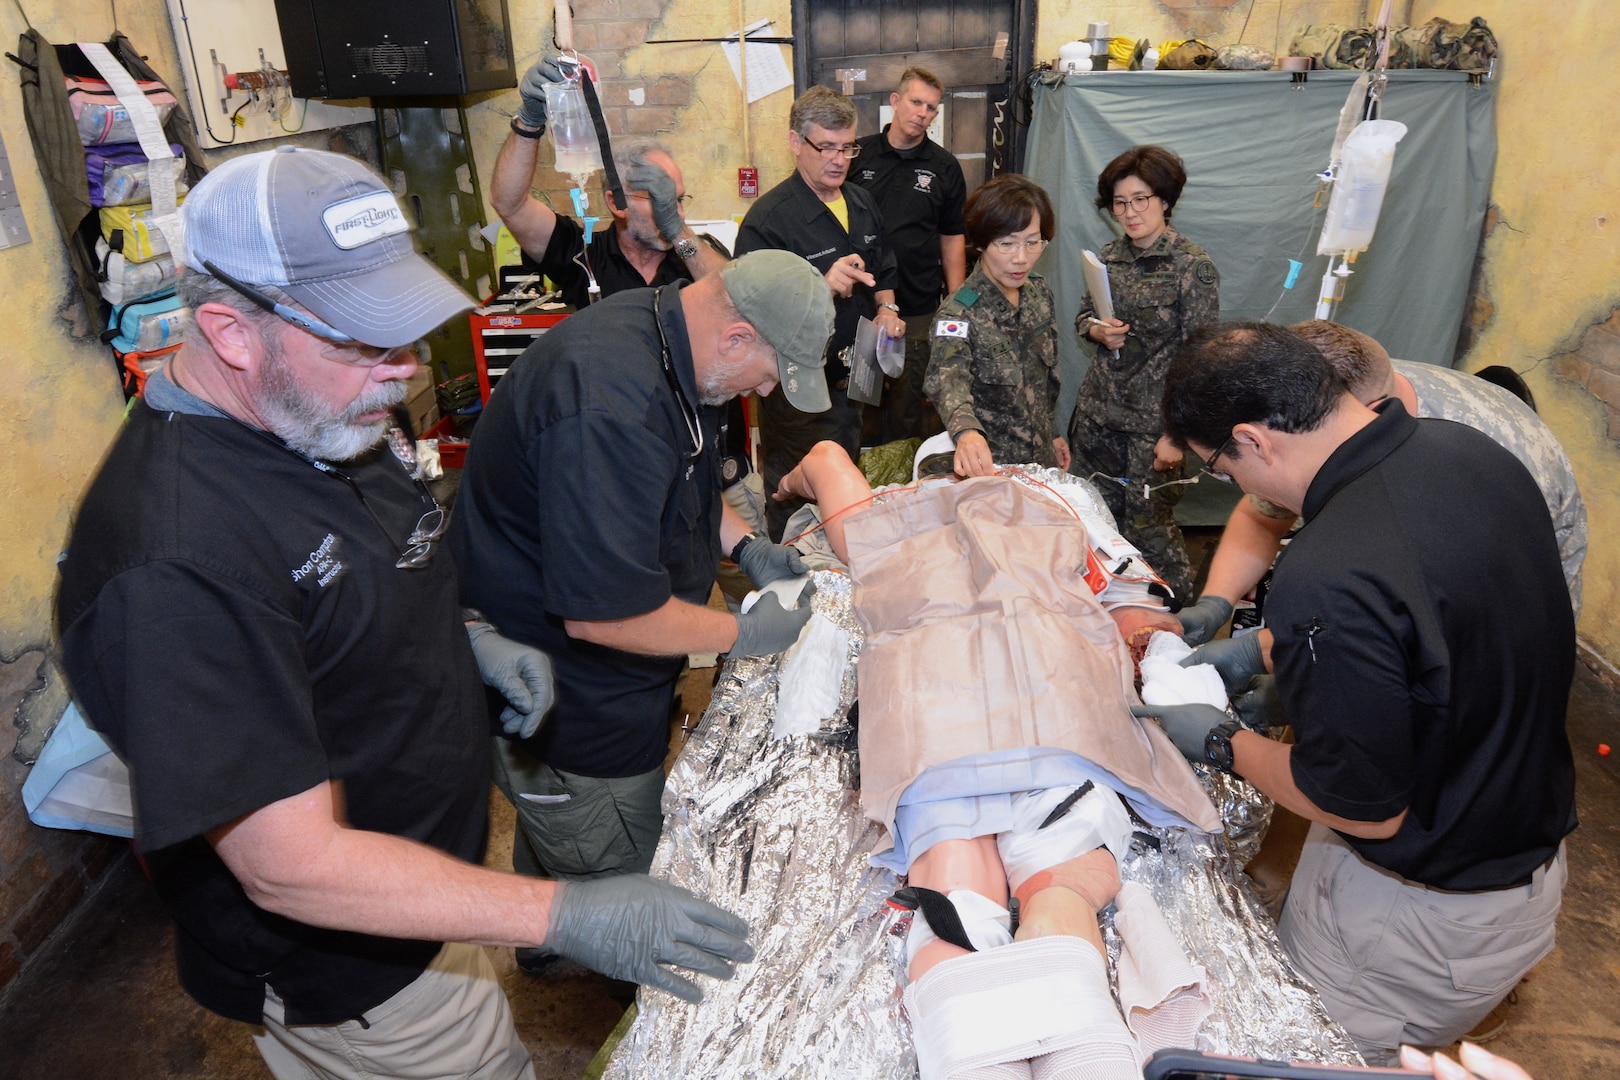 Republic of Korea Army Brig. Gen. Myoung-ok Kwon (center), superintendent for the Korea Armed Forces Nursing Academy, observes a live demonstration of a combat trauma management scenario in a mock aid station conducted by instructors for the U.S. Army Medical Department Center & School, Health Readiness Center of Excellence’s Tactical Combat Medical Care course during a May 2019 visit to Joint Base San Antonio-Fort Sam Houston.  Also pictured (to her right) is ROK Army Lt. Col. Yoomi Jung, director for the Academy’s Clinical Nursing Science Department.